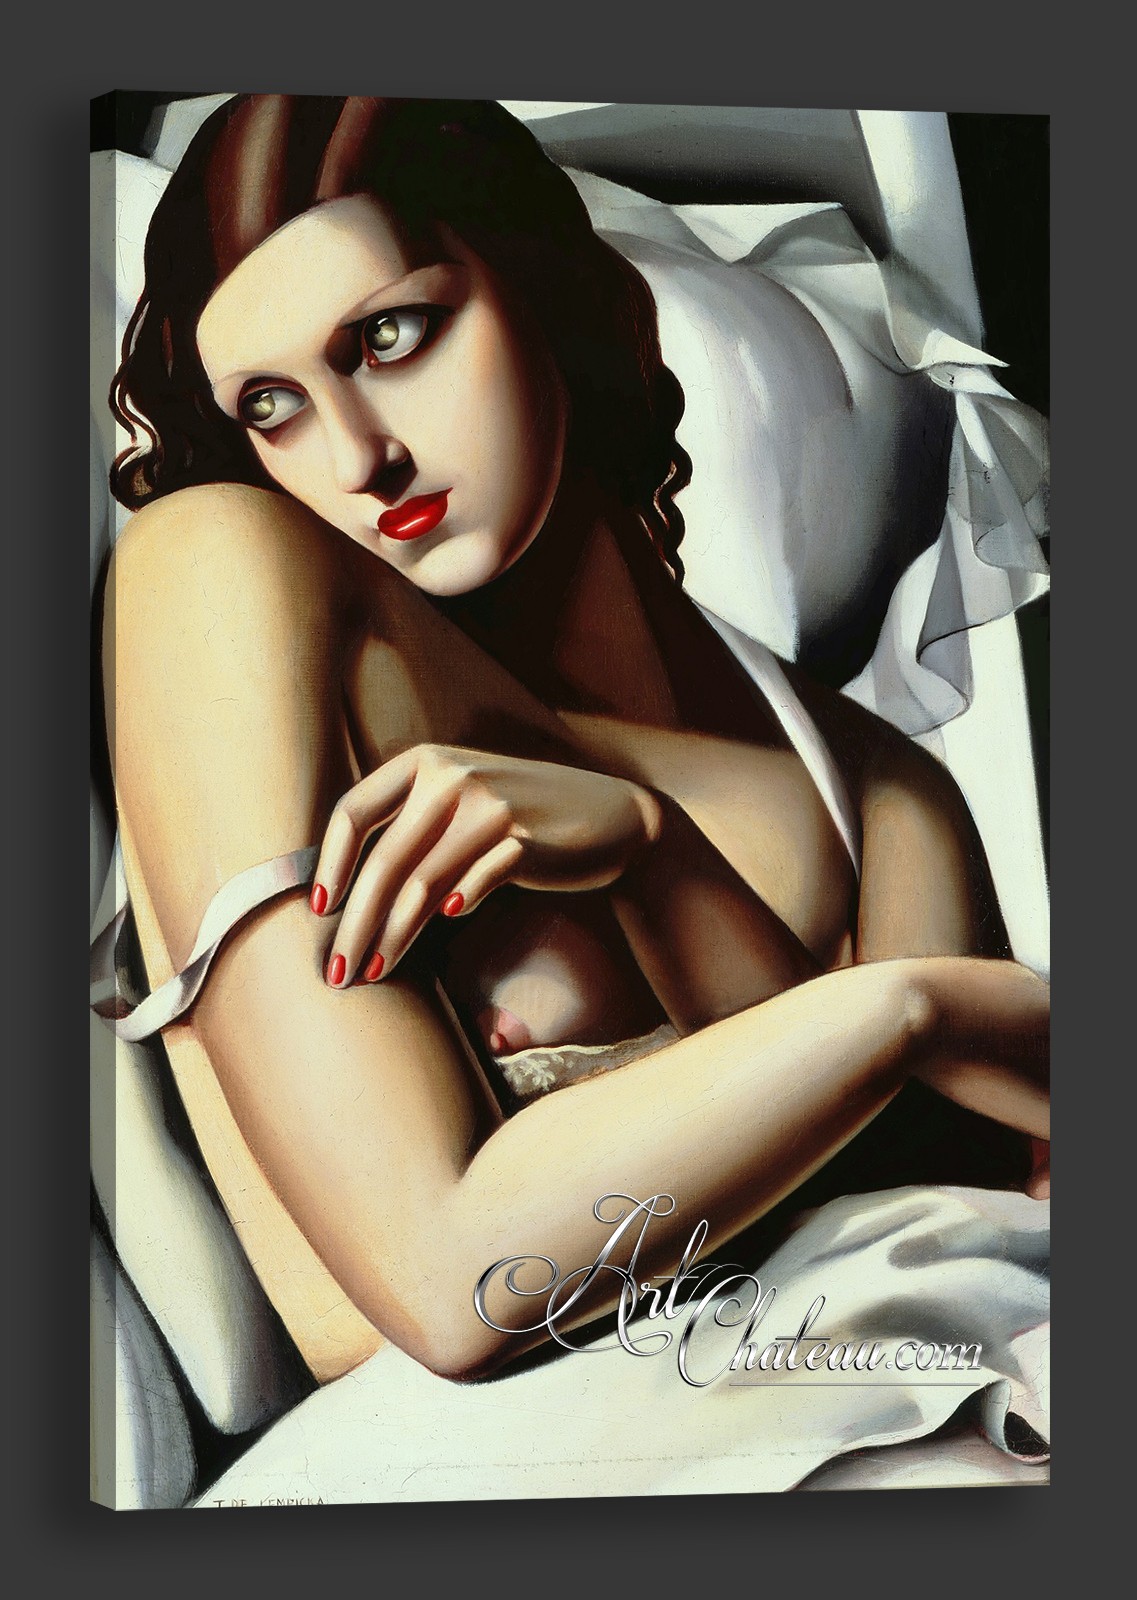 The Convalescent, after painting by Tamara de Lempicka